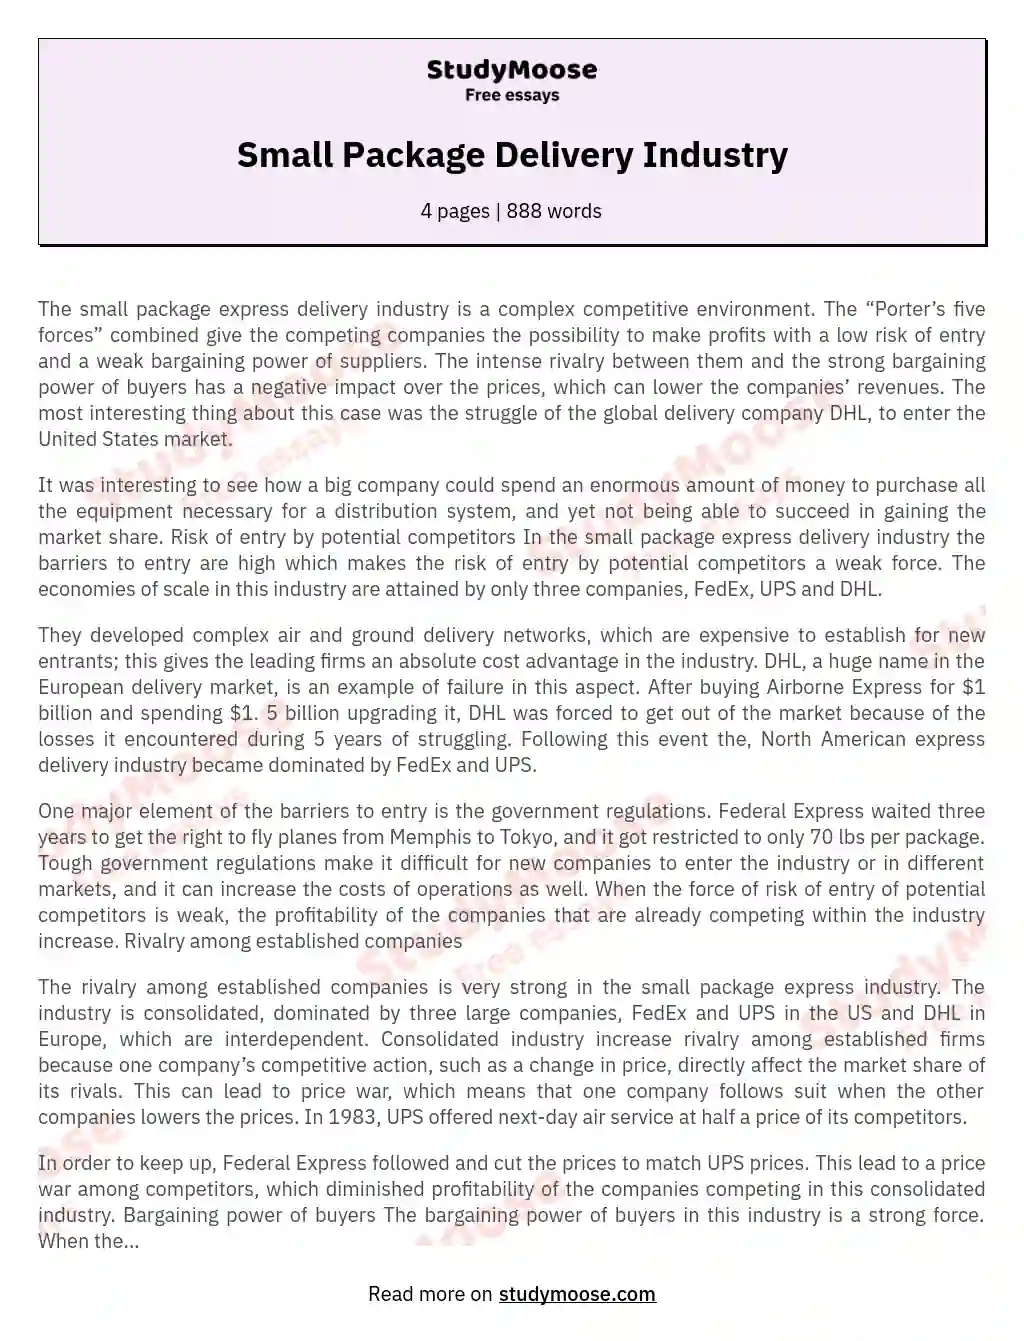 Small Package Delivery Industry essay